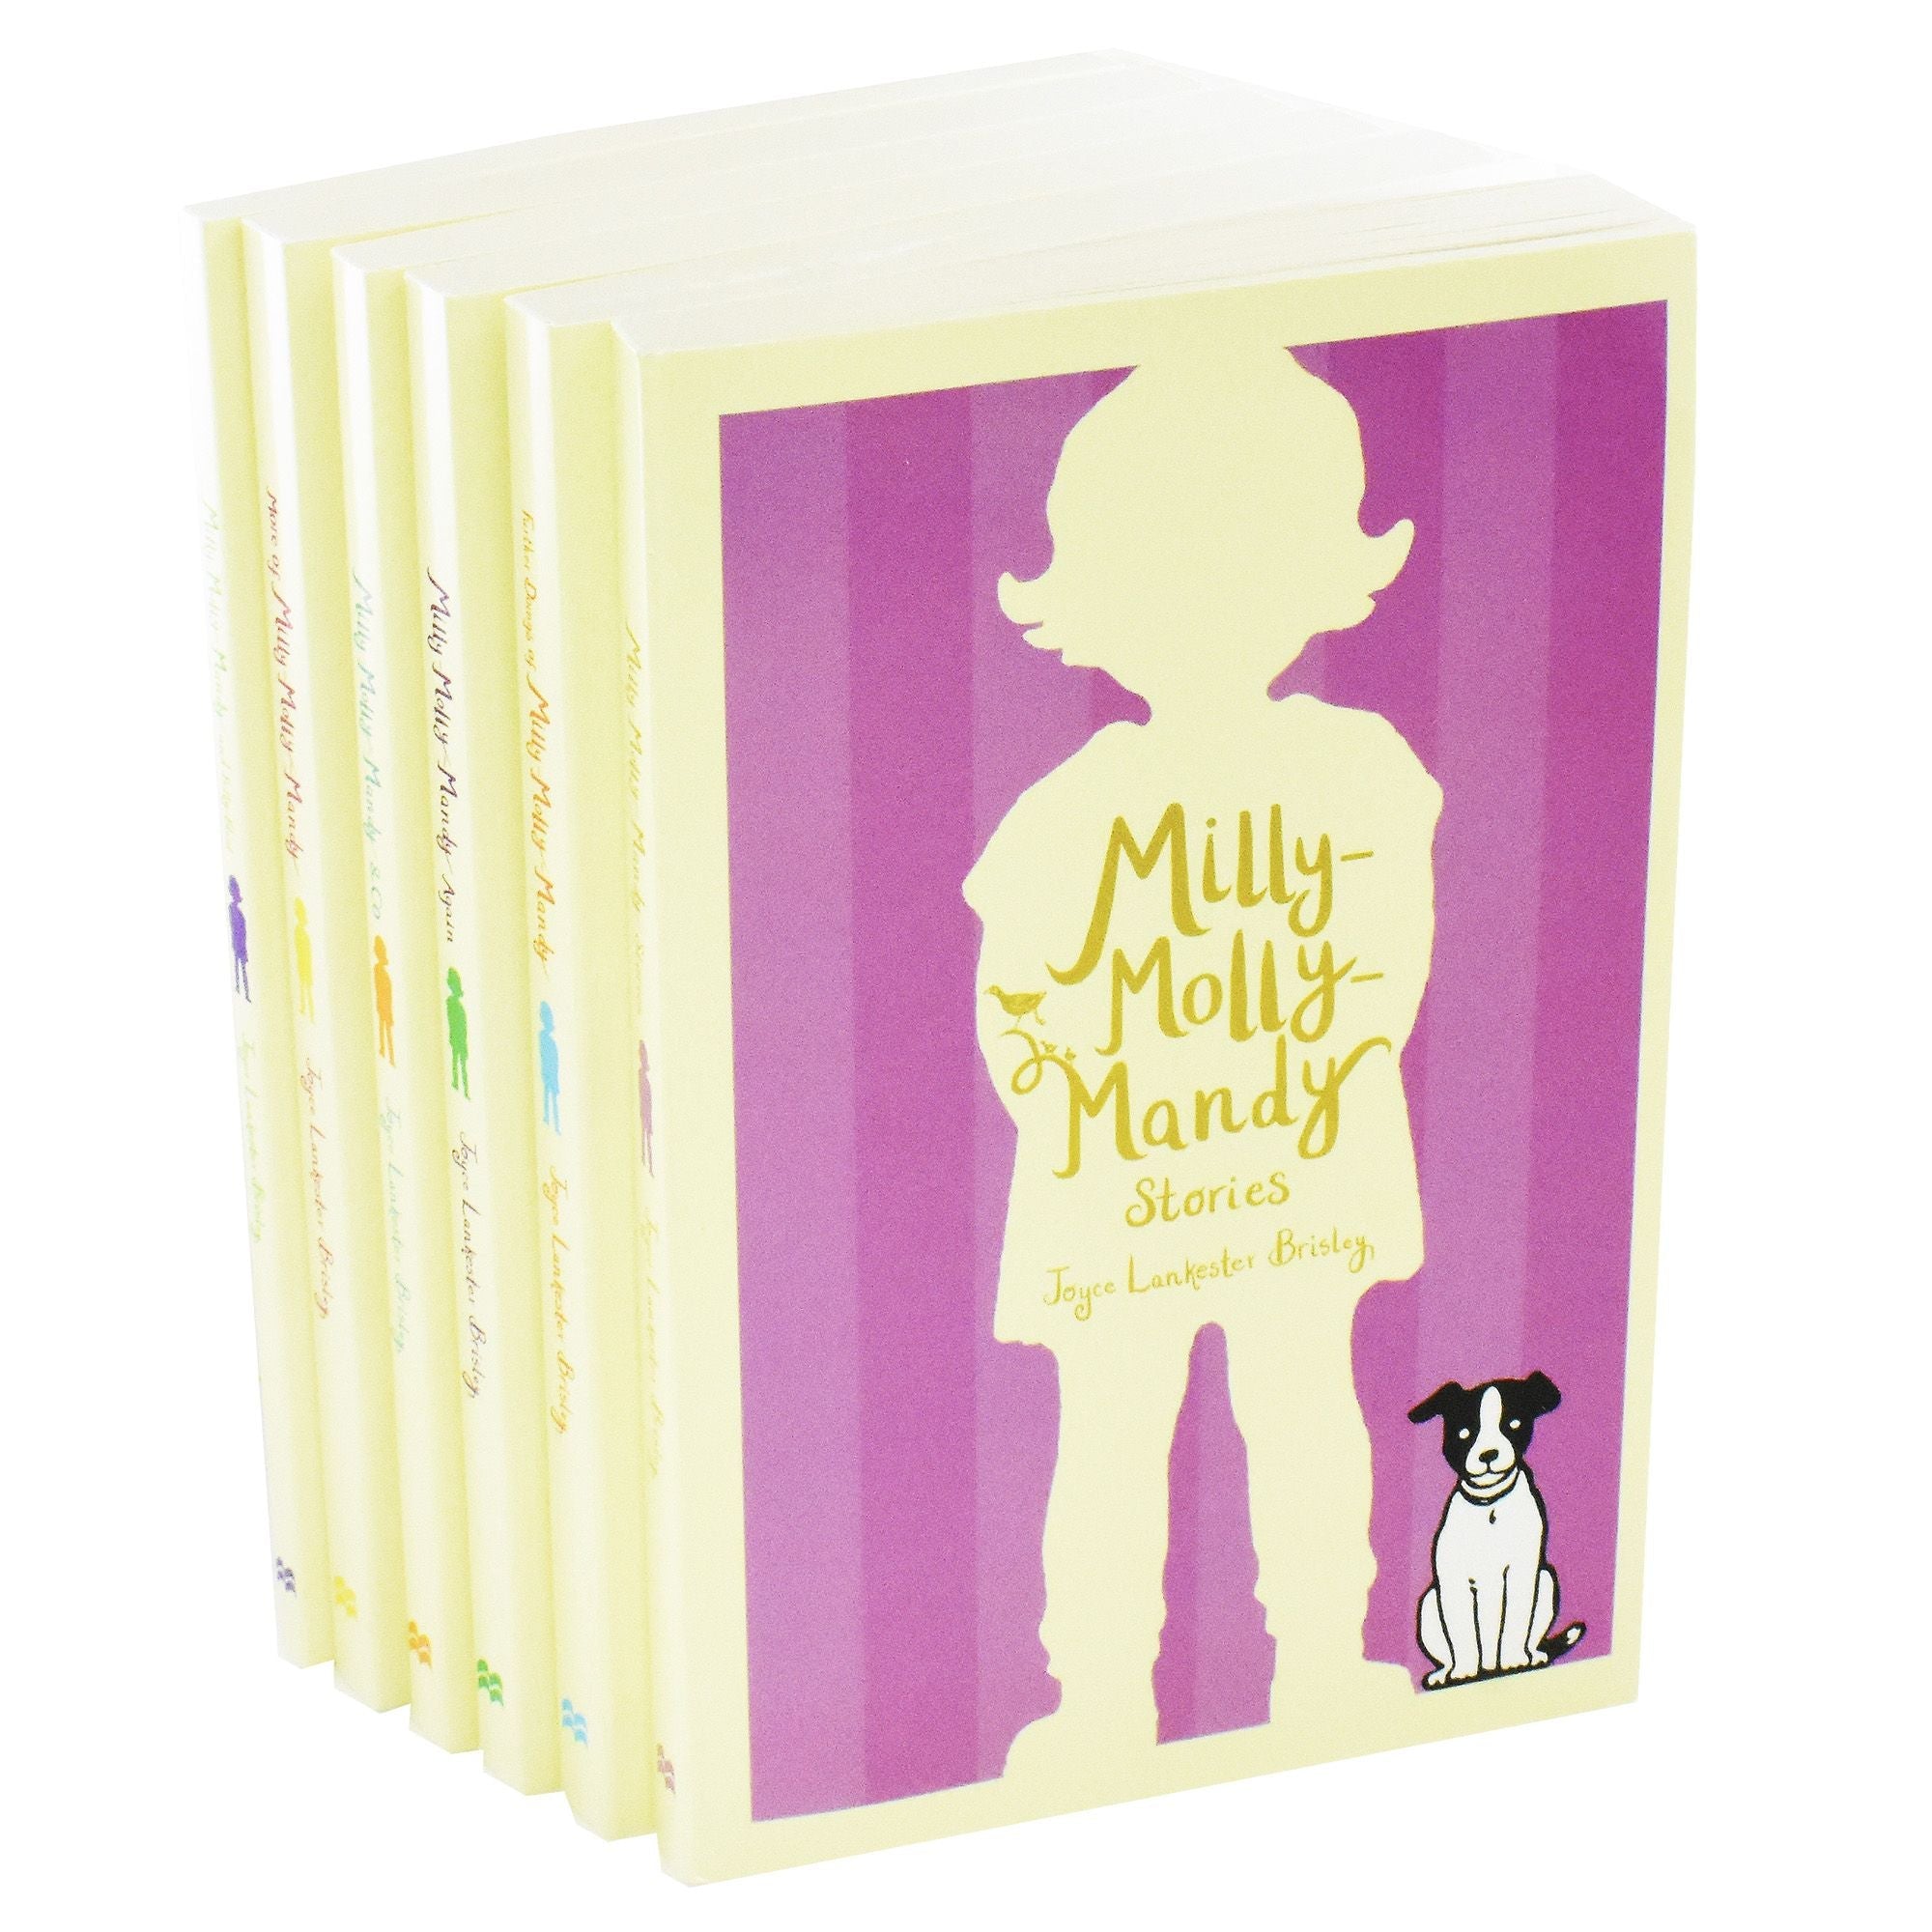 Milly Molly Mandy Stories Collection 6 Books Set By Joyce Lankester Brisley -Ages 5-7 - Paperback